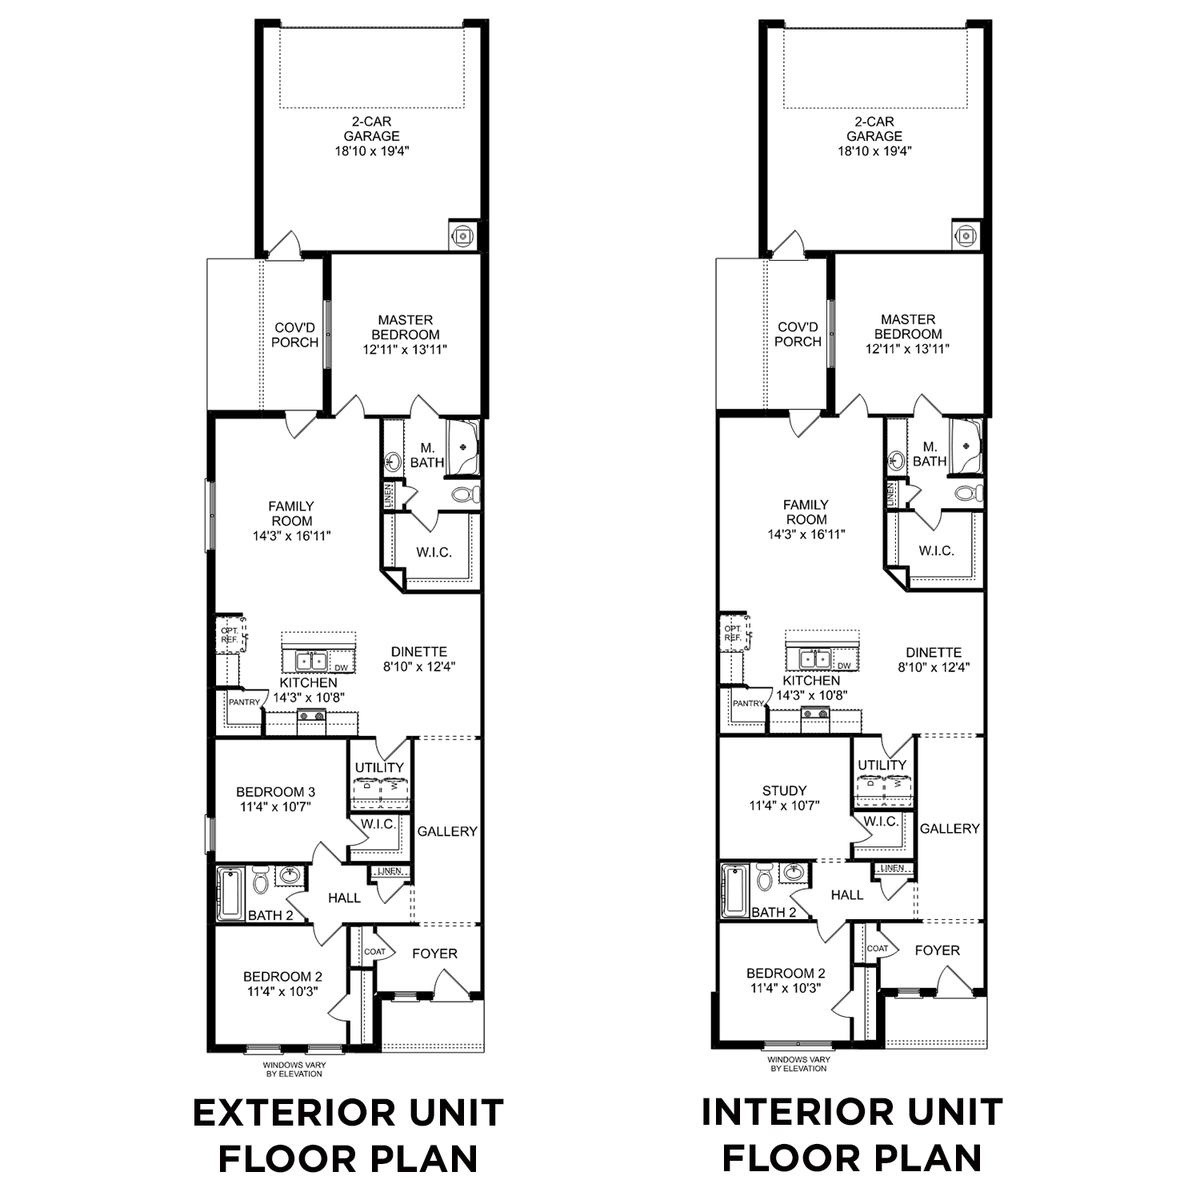 1 - The Camilla A floor plan layout for 407 Ronnie Drive in Davidson Homes' Cain Park community.